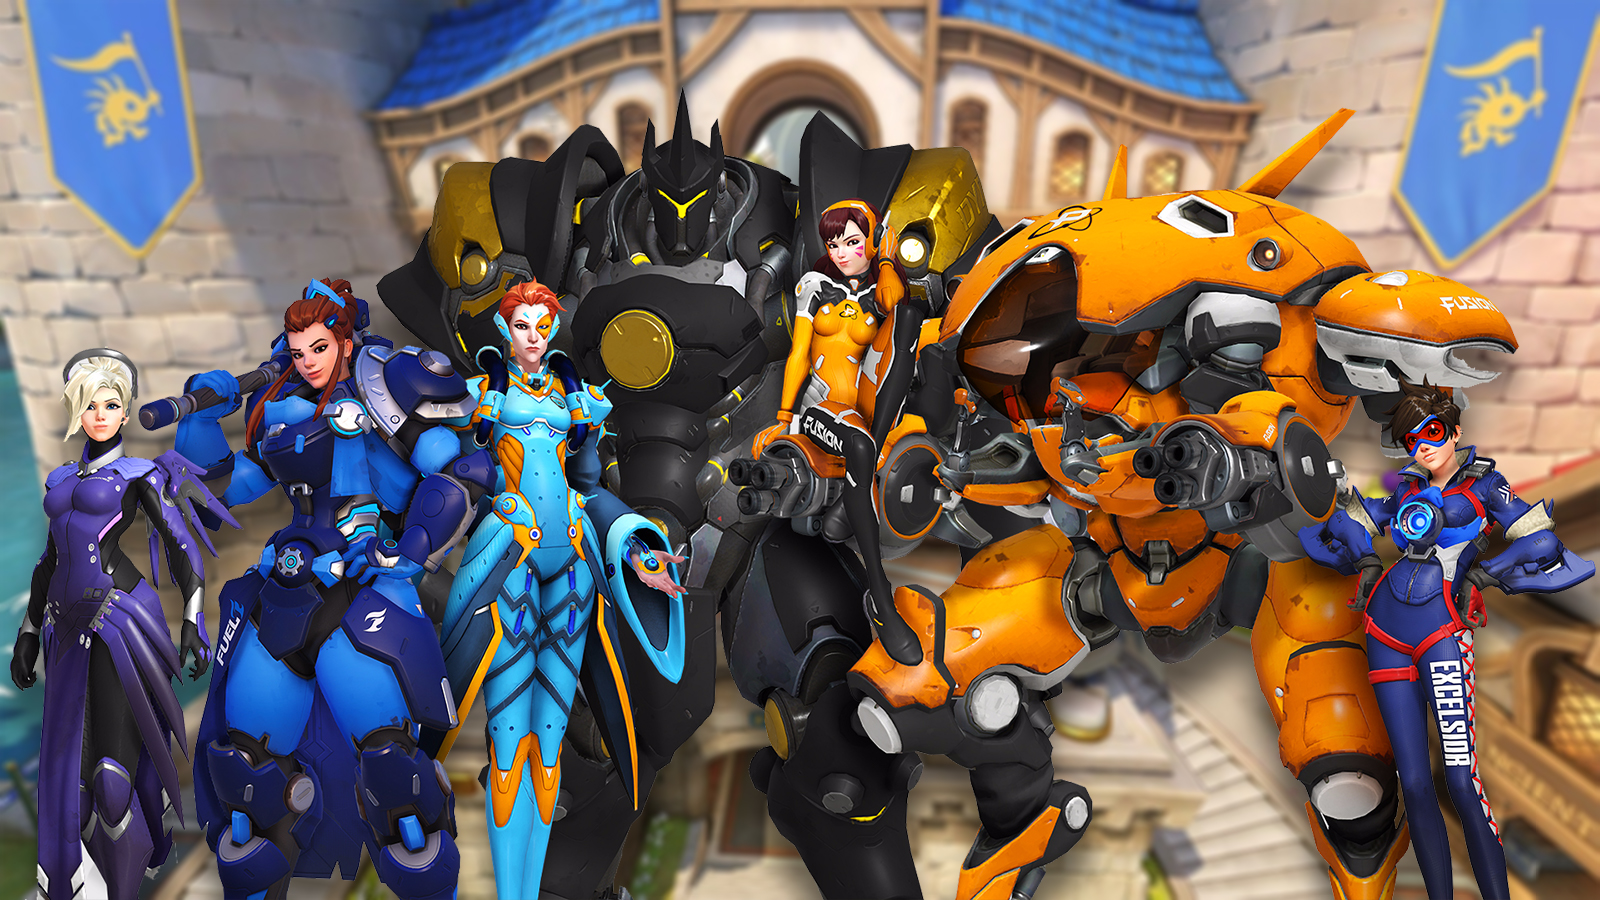 Overwatch League drops: How to get the free skins